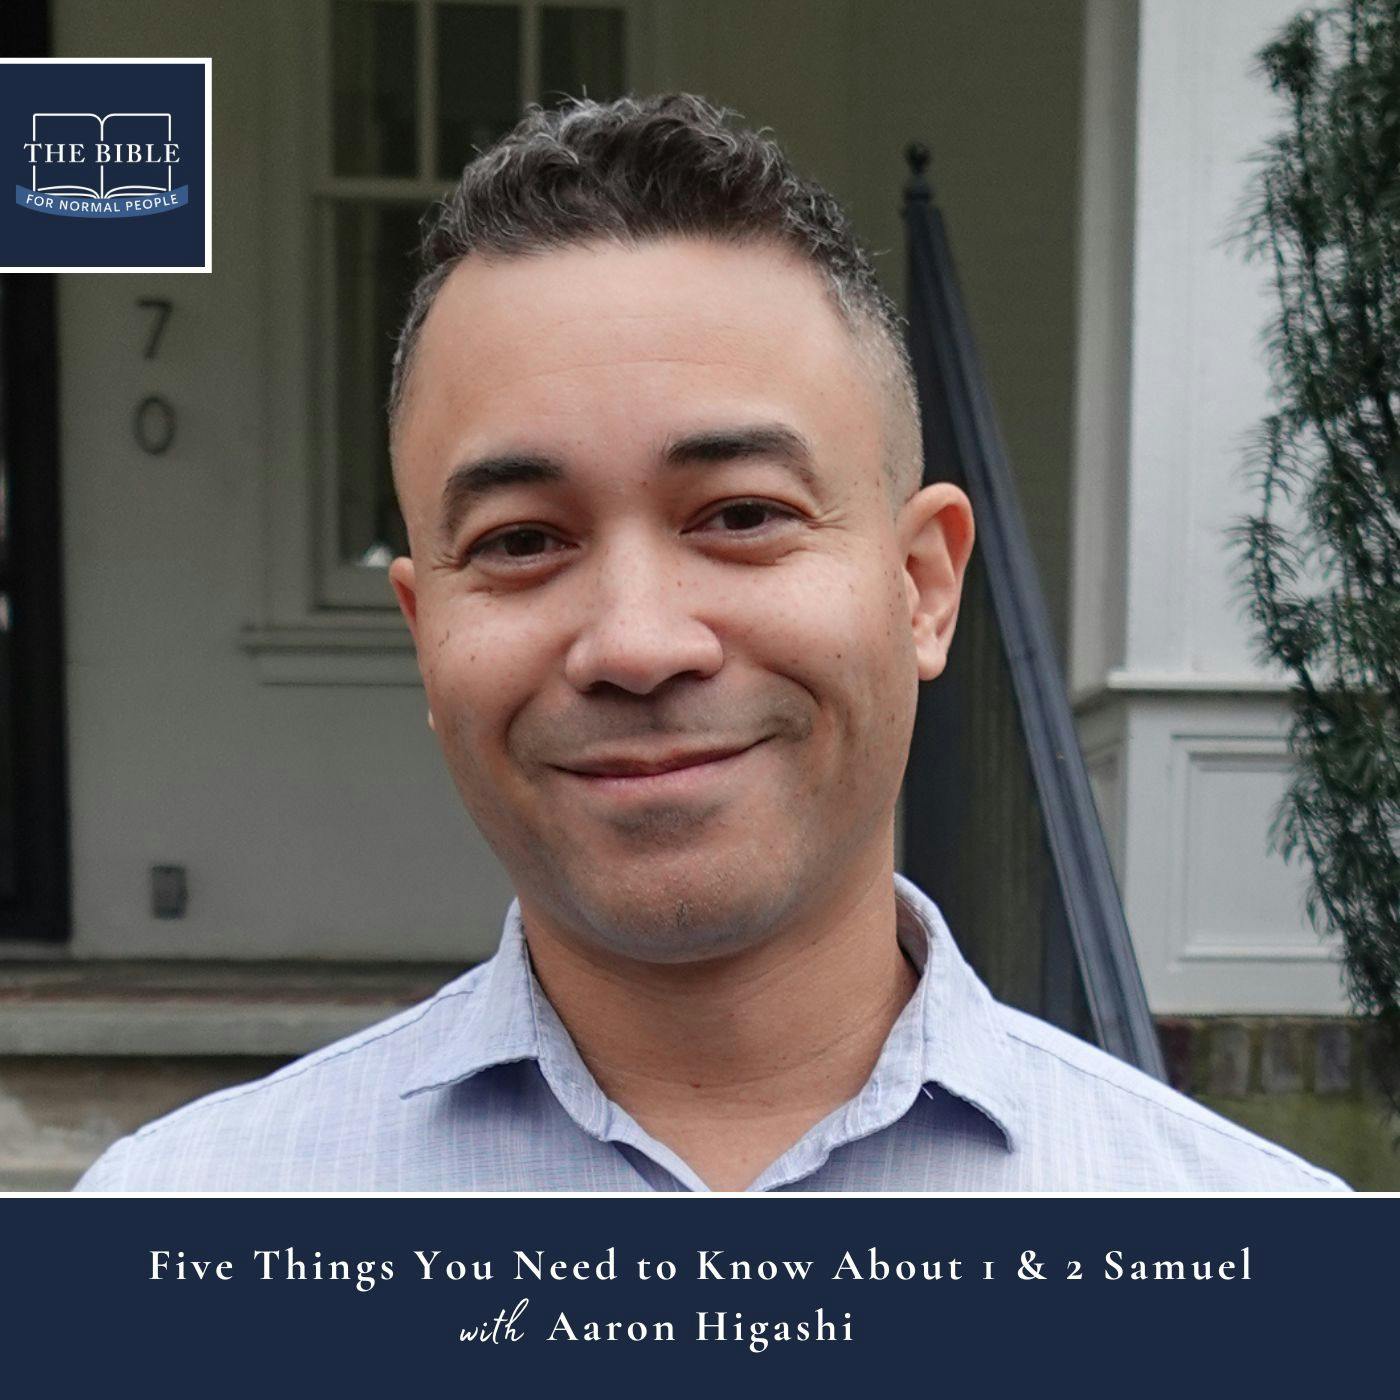 [Bible] Episode 264: Aaron Higashi - Five Things You Need to Know About 1 & 2 Samuel